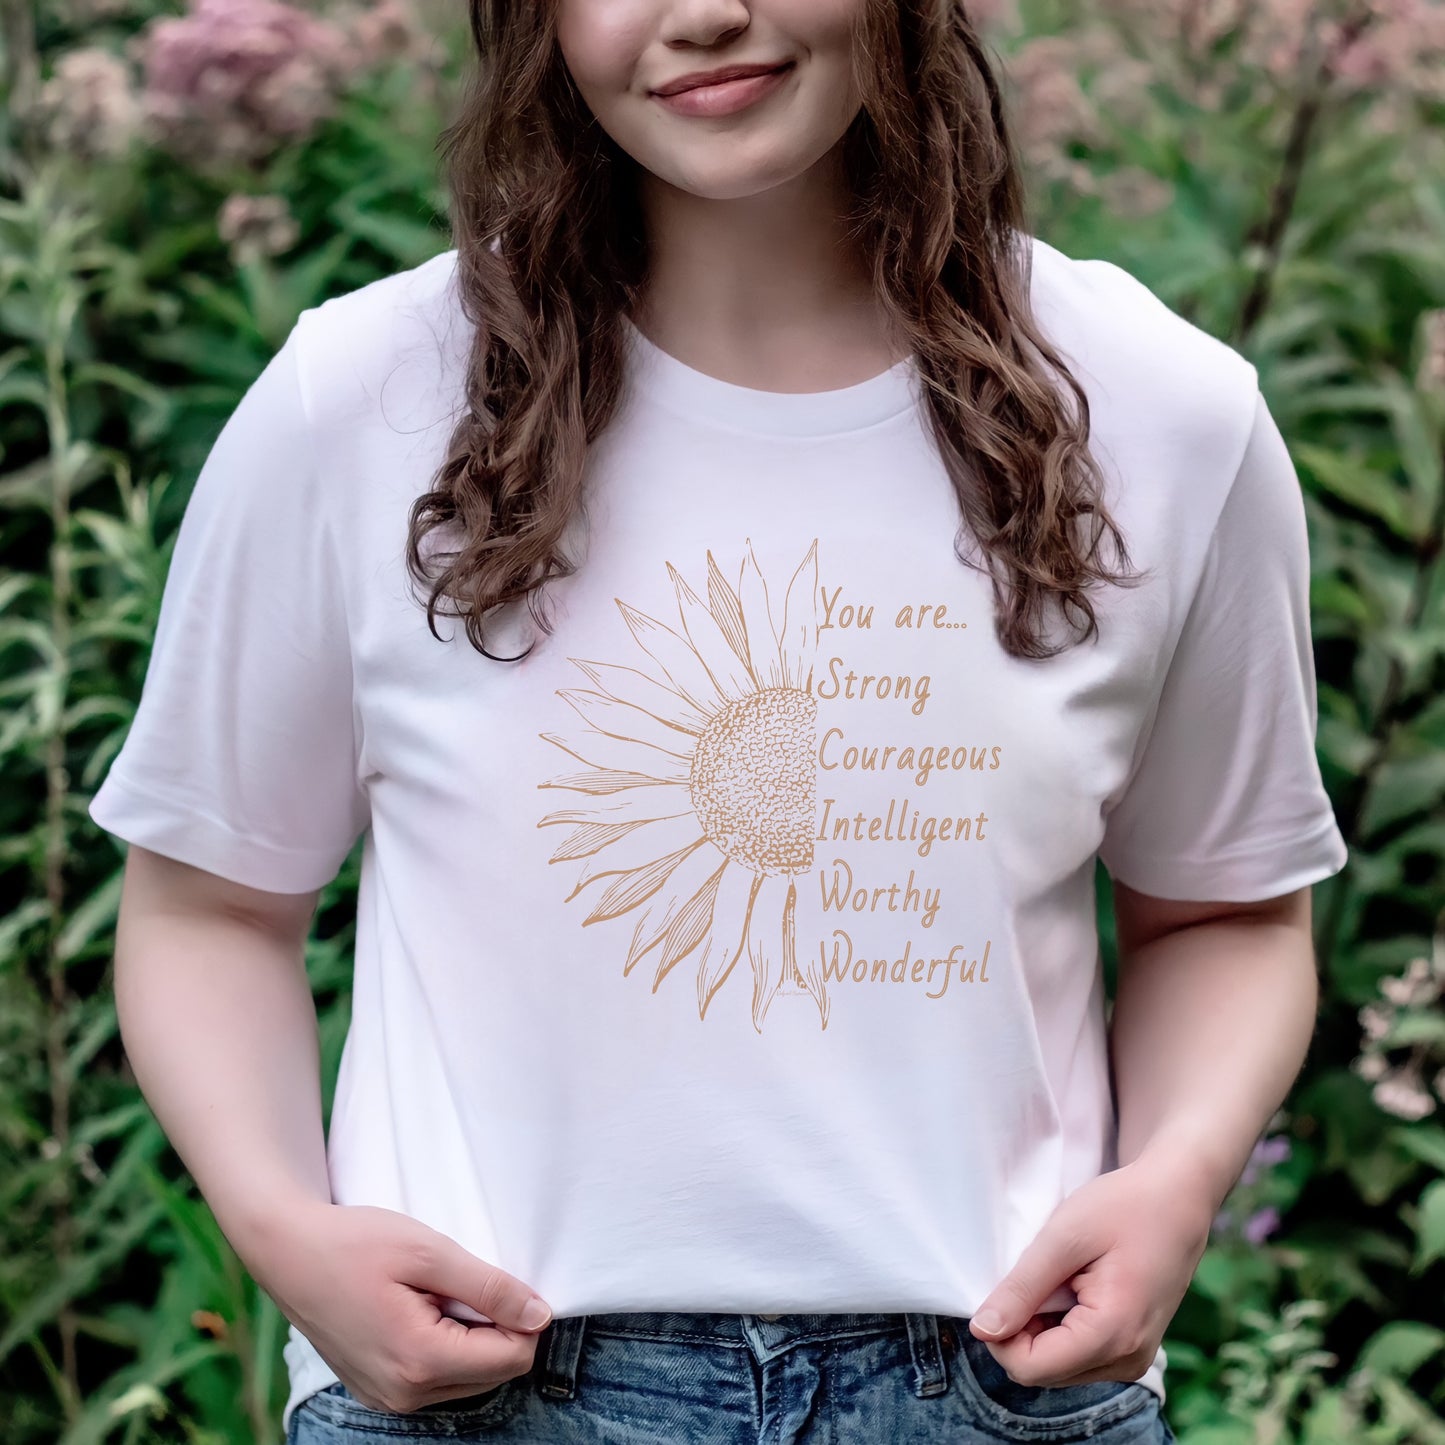 This thoughtfully designed shirt features a vibrant sunflower, symbolizing resilience and growth, accompanied by the powerful mantra: "You are strong, courageous, intelligent, worthy, and wonderful."